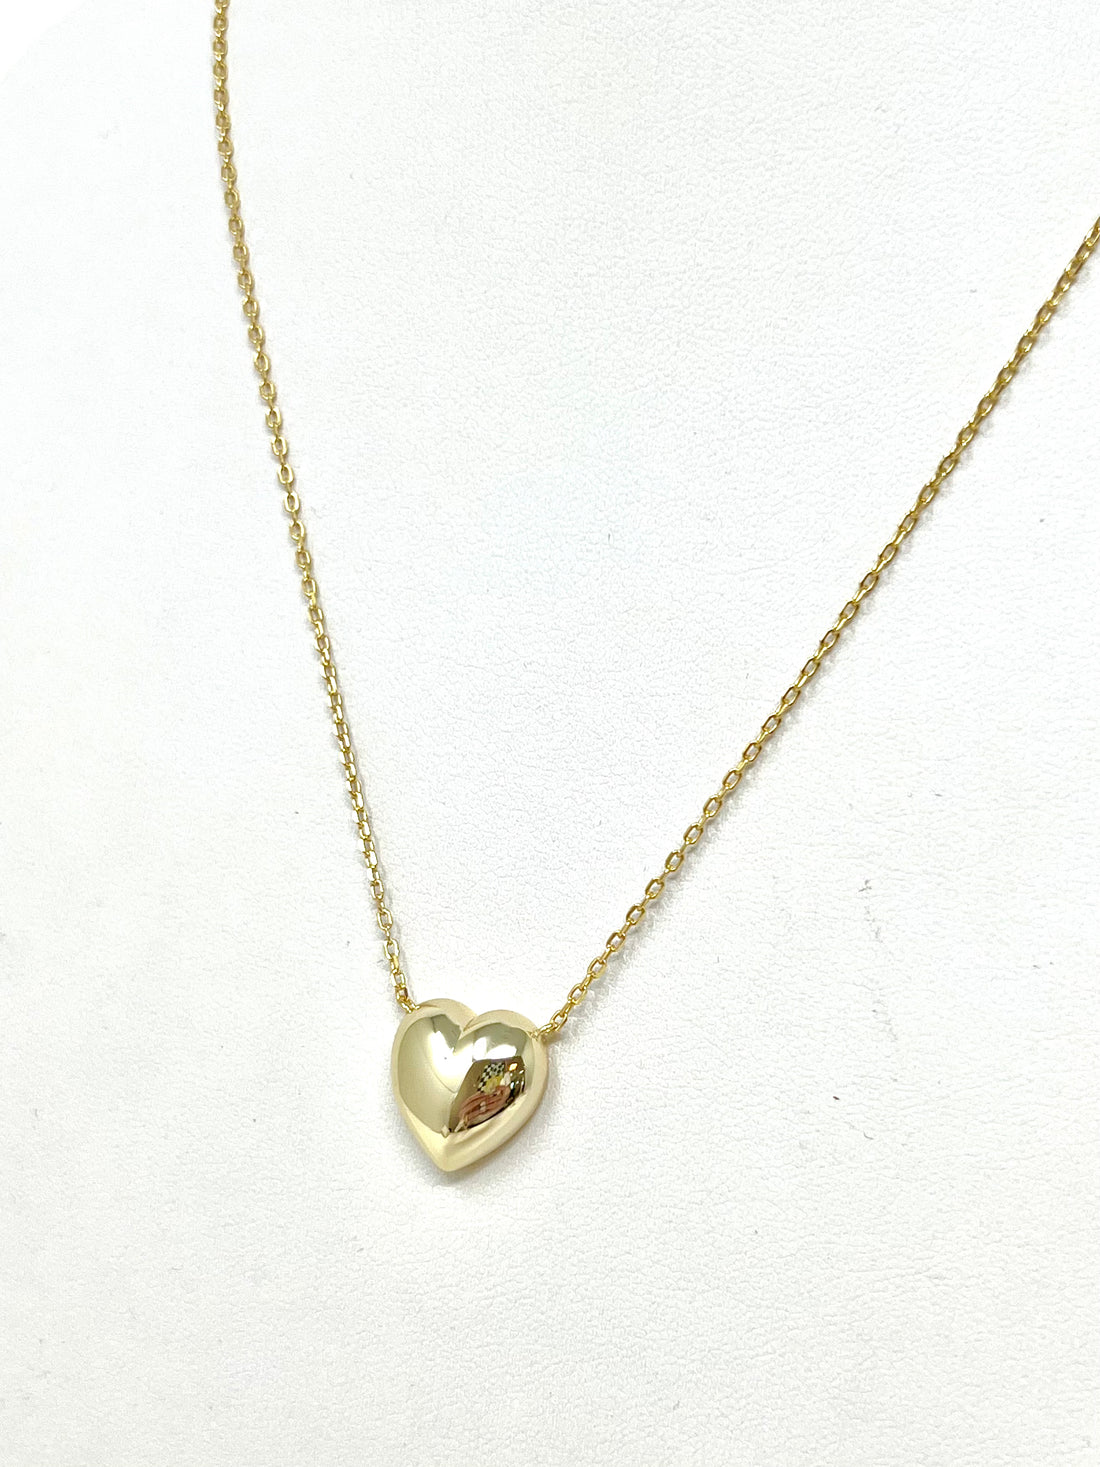 Full Heart Necklace in Gold